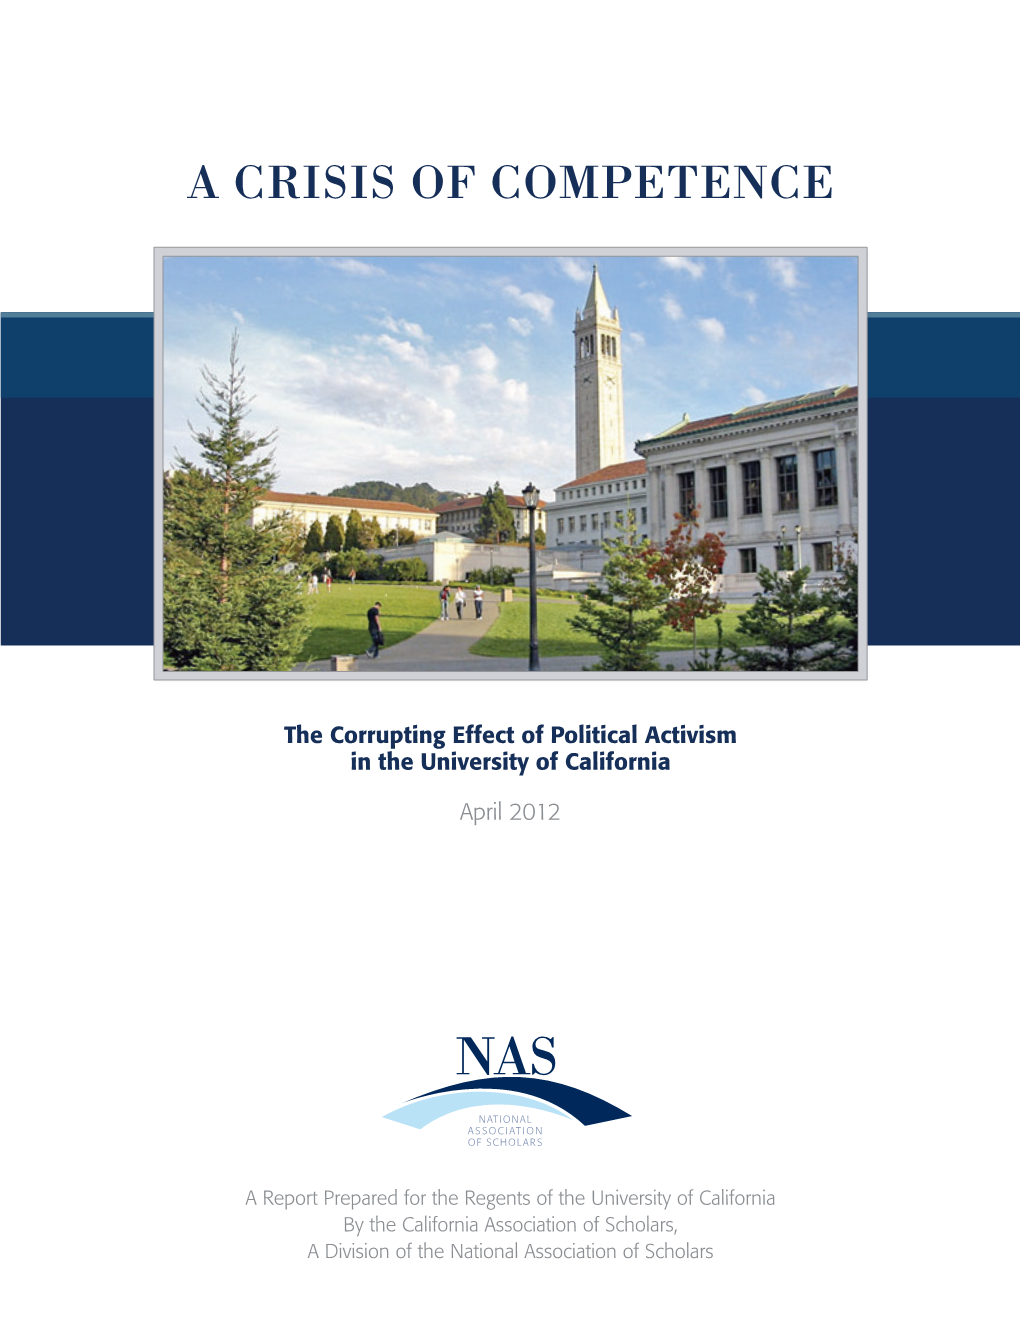 A Crisis of Competence